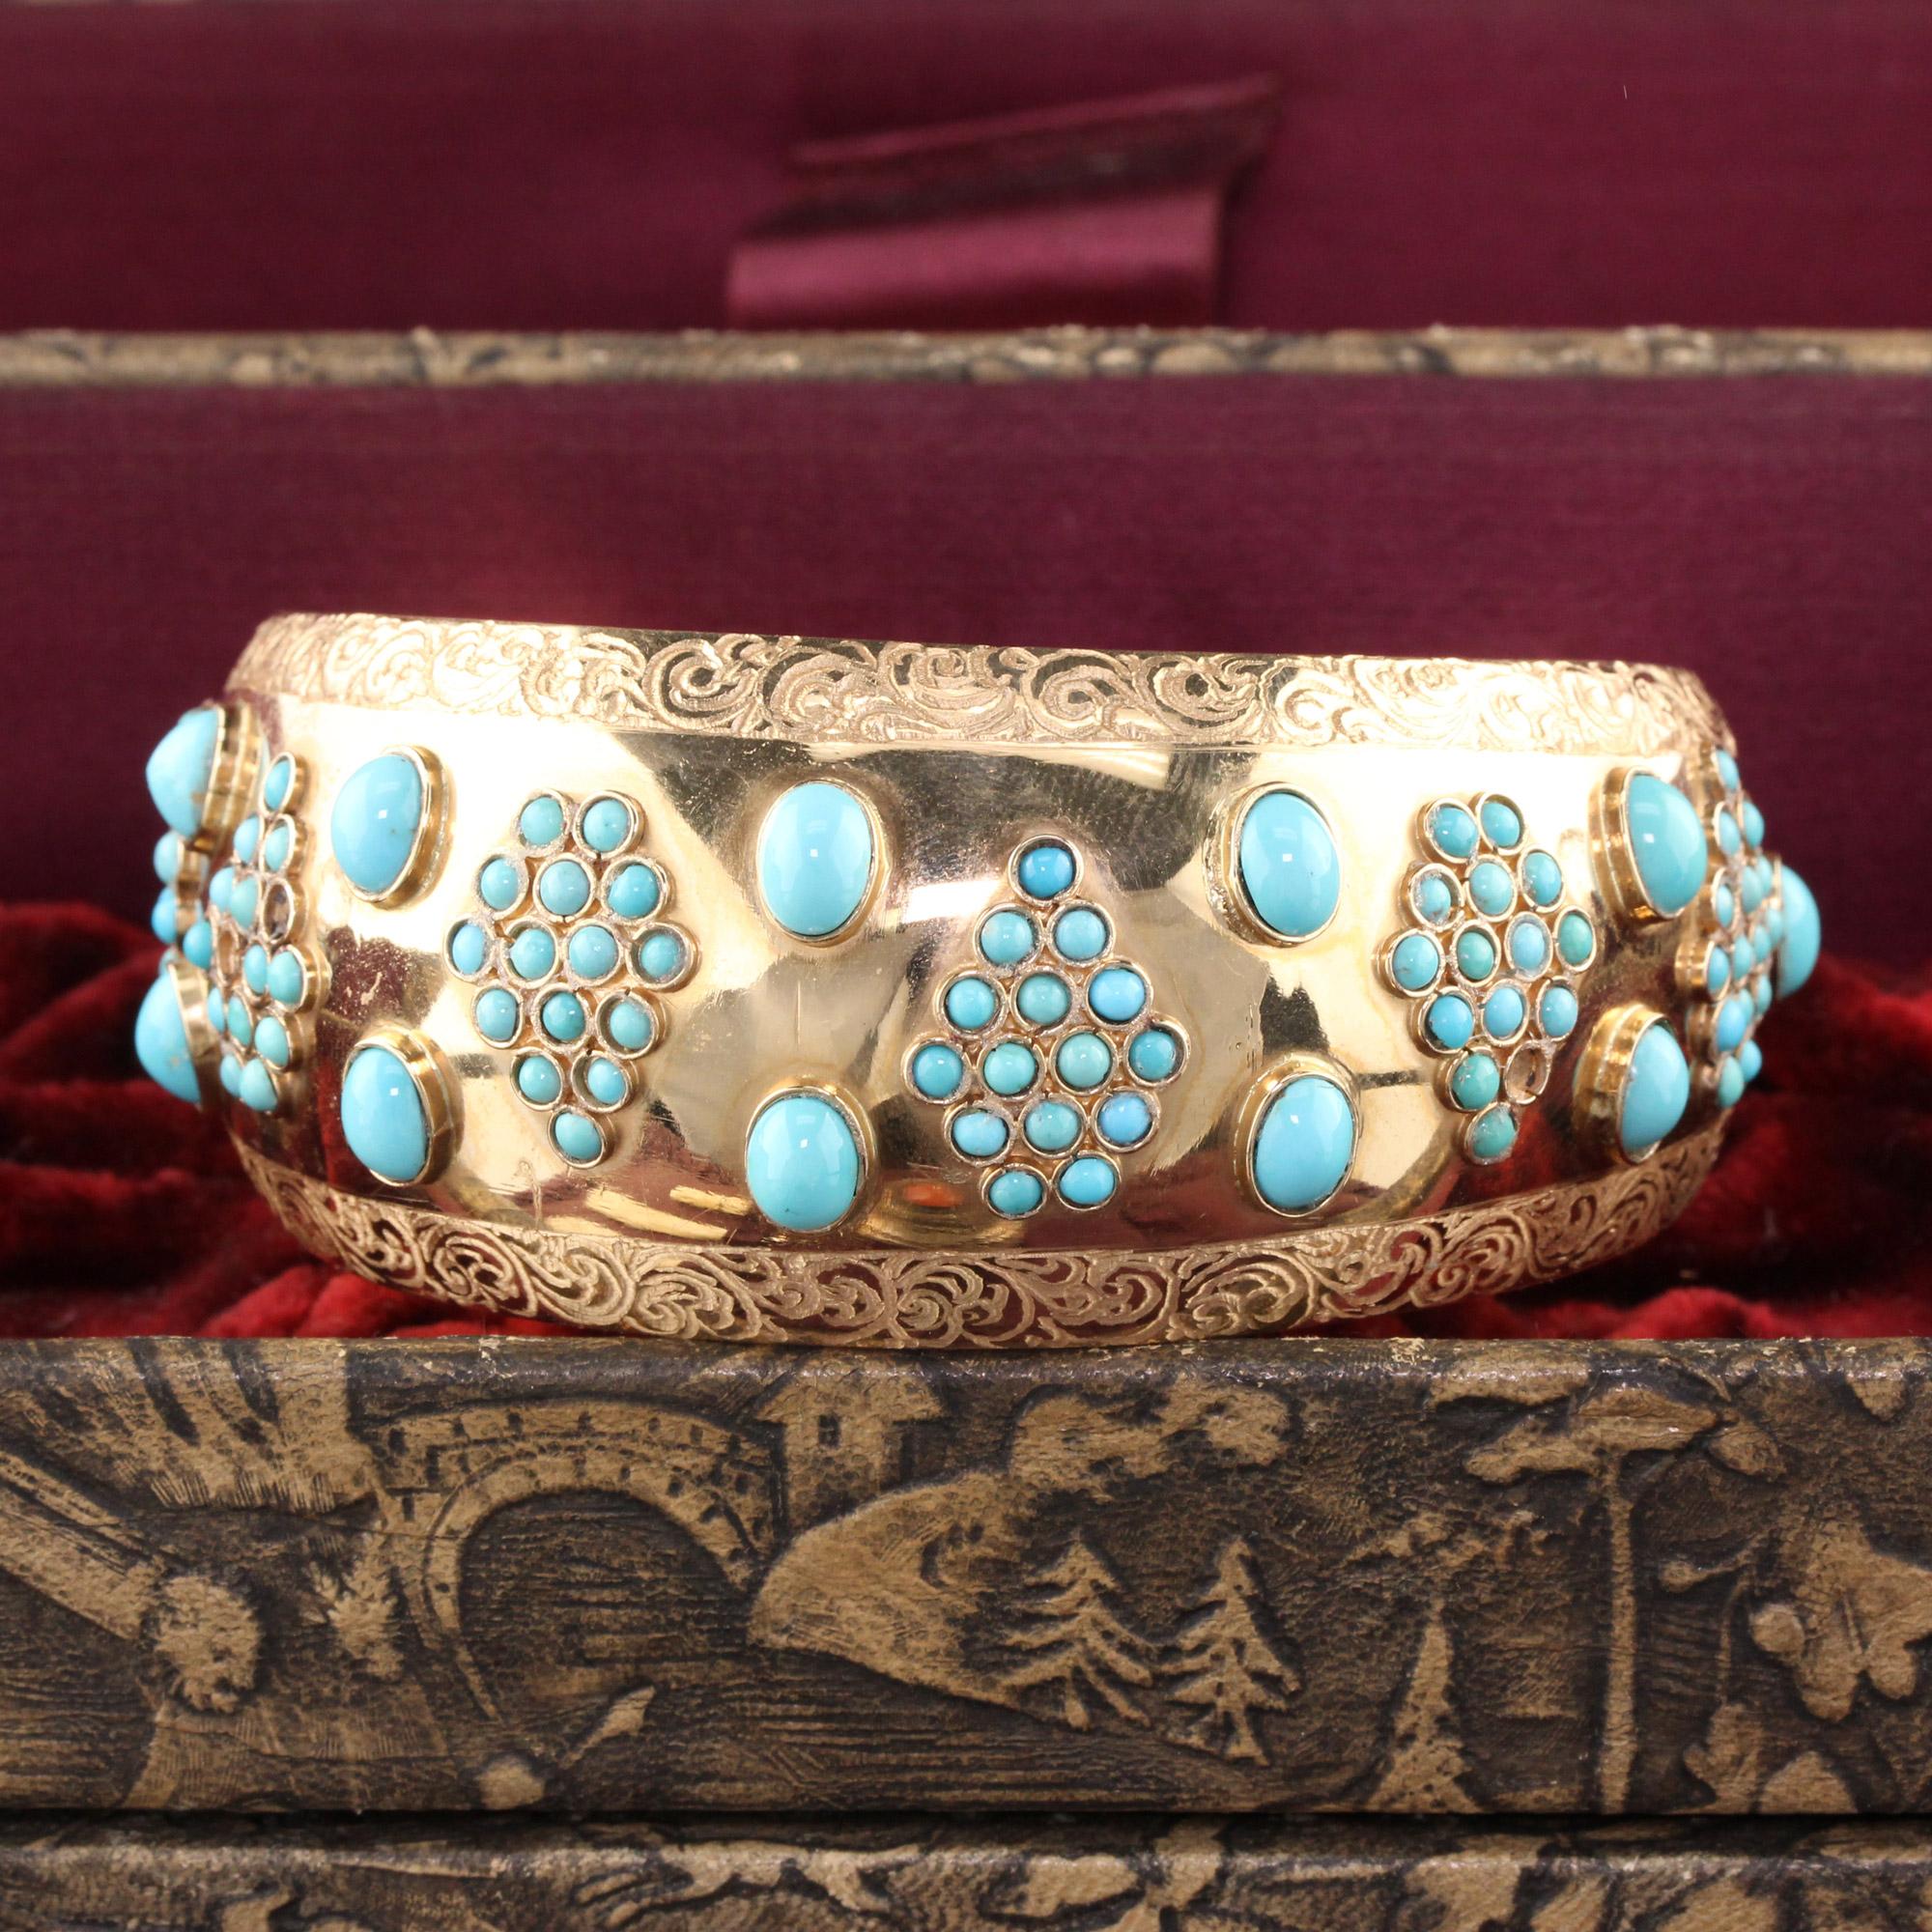 Fashionable yellow gold arm cuff set with turquoise. 

Metal: 18K Yellow Gold

Weight: 81.7 grams

Measurements: Width measures 0.34 inches. Fits 10 inch arm.